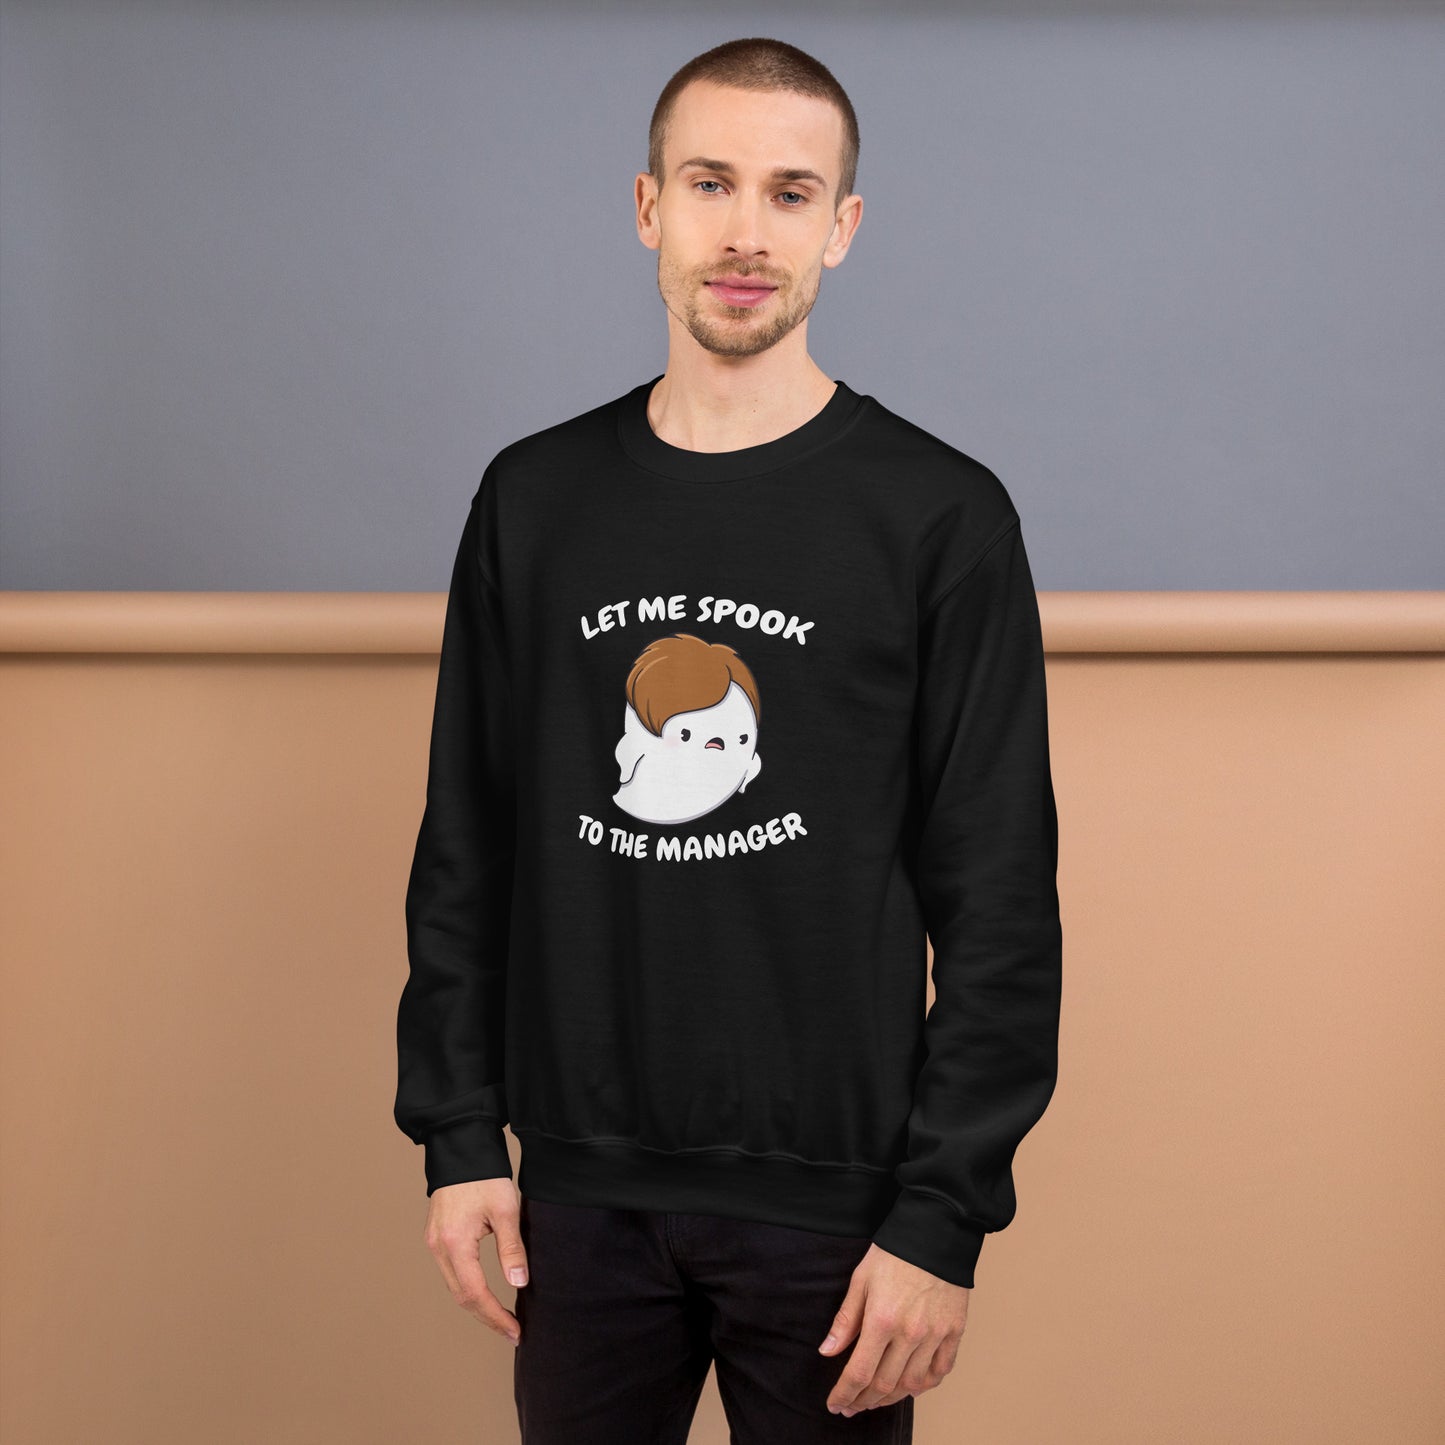 Let me spook to the manager - Unisex Sweatshirt